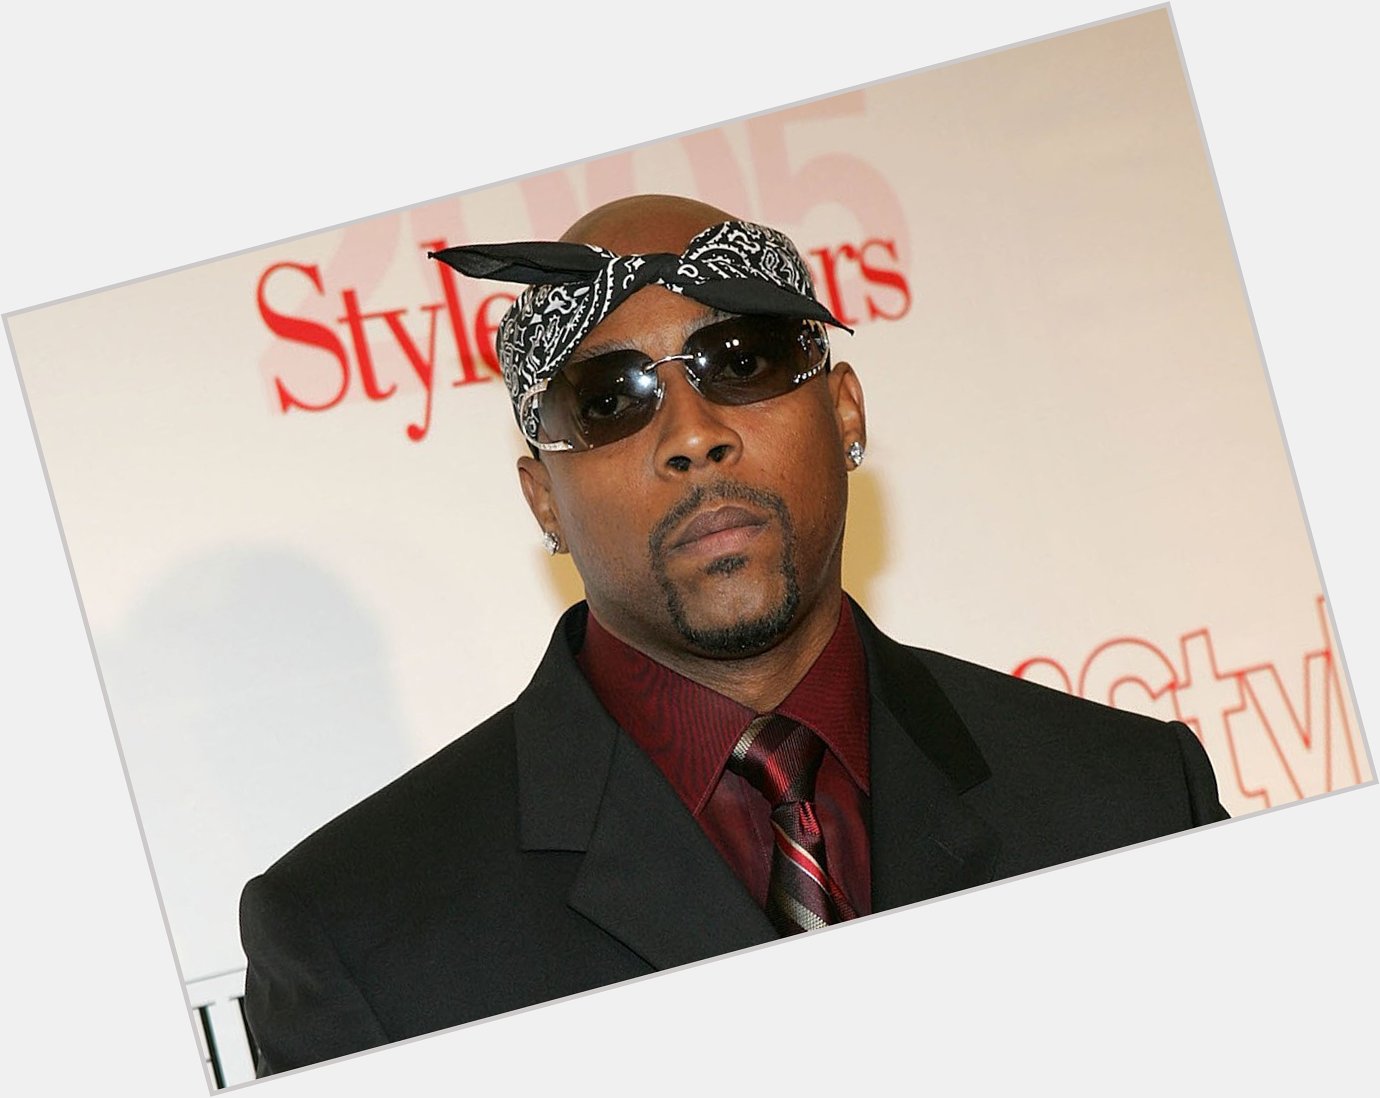 52 Years Ago, the \"King of Hooks\" was born.

Happy Birthday to Nate Dogg. Rest in Peace. 